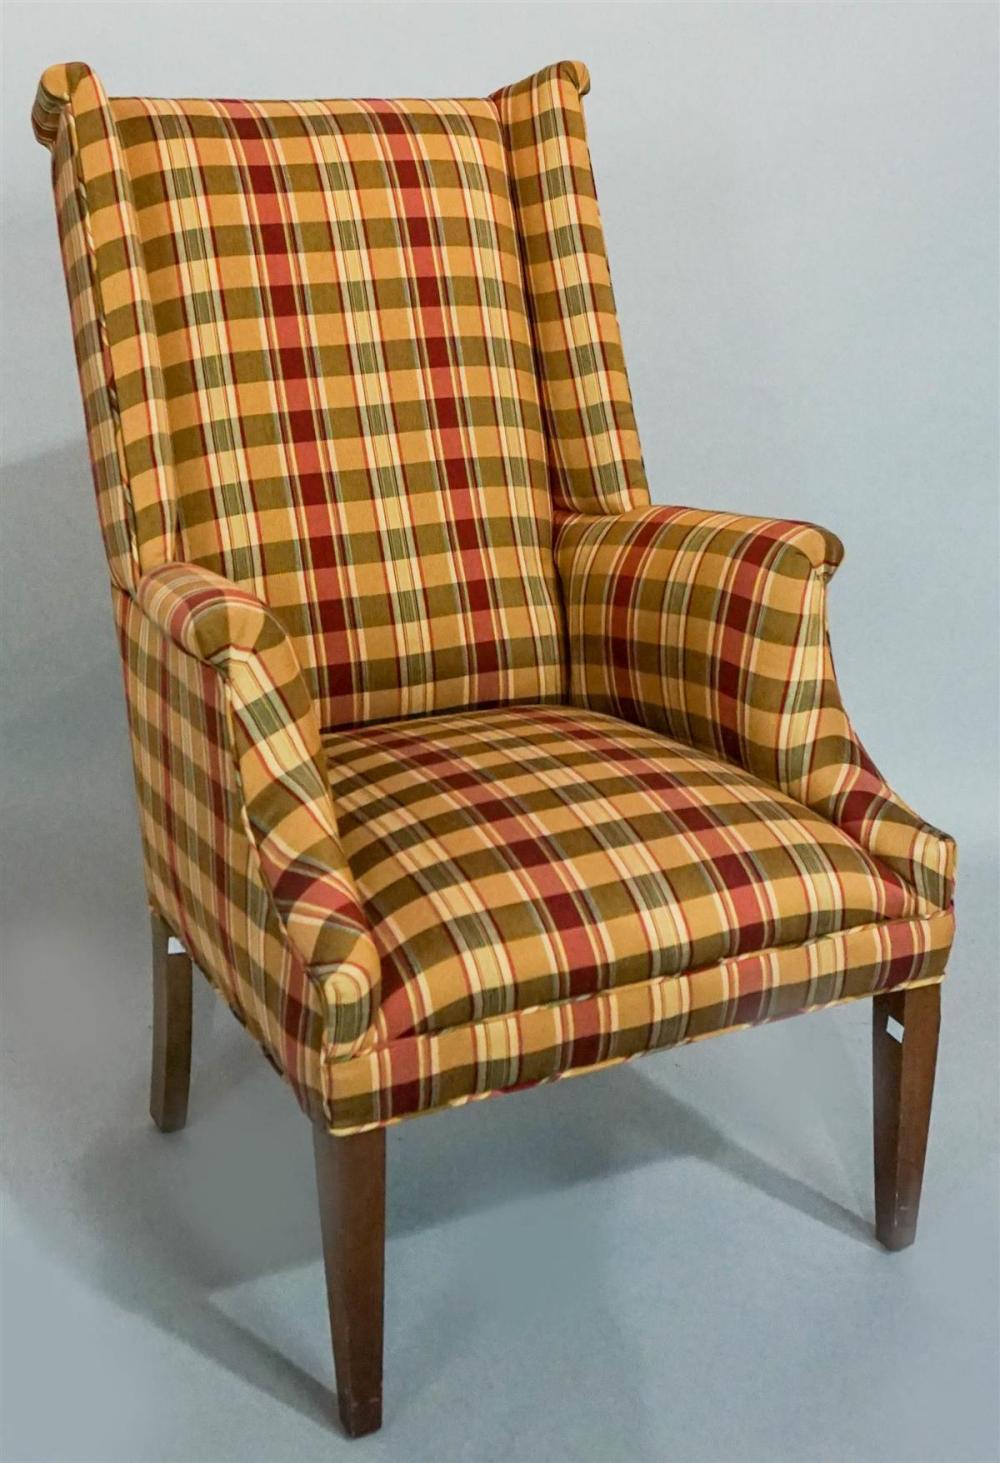 MODERN CHECK PATTERN UPHOLSTERED WING